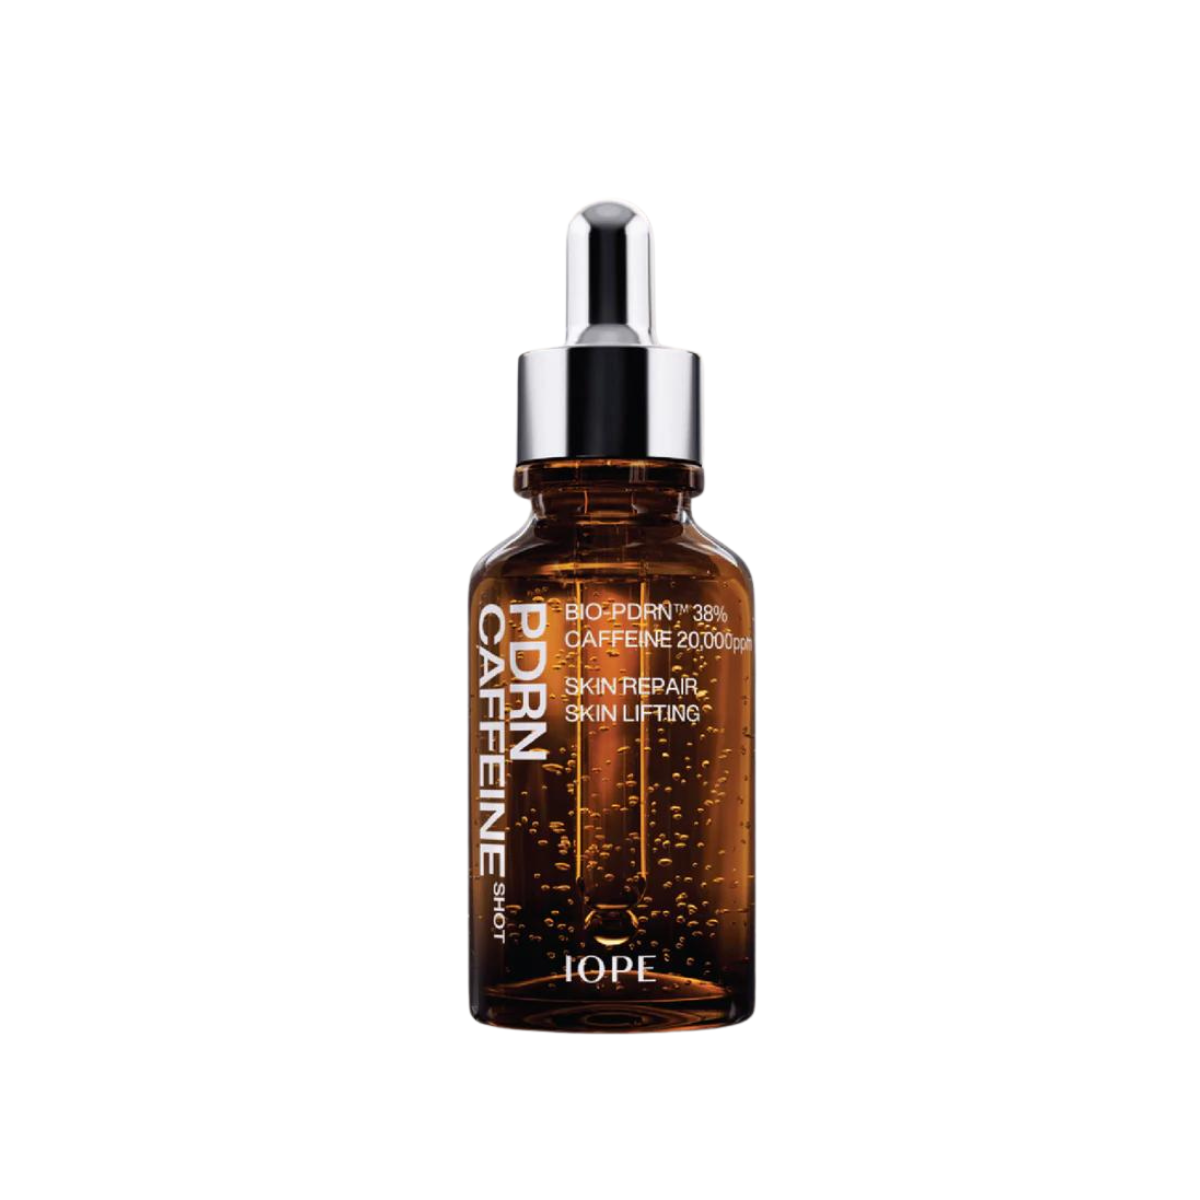 IOPE PDRN Caffeine Shot Ampoule 30ml/50ml in a clear glass bottle with a silver cap.